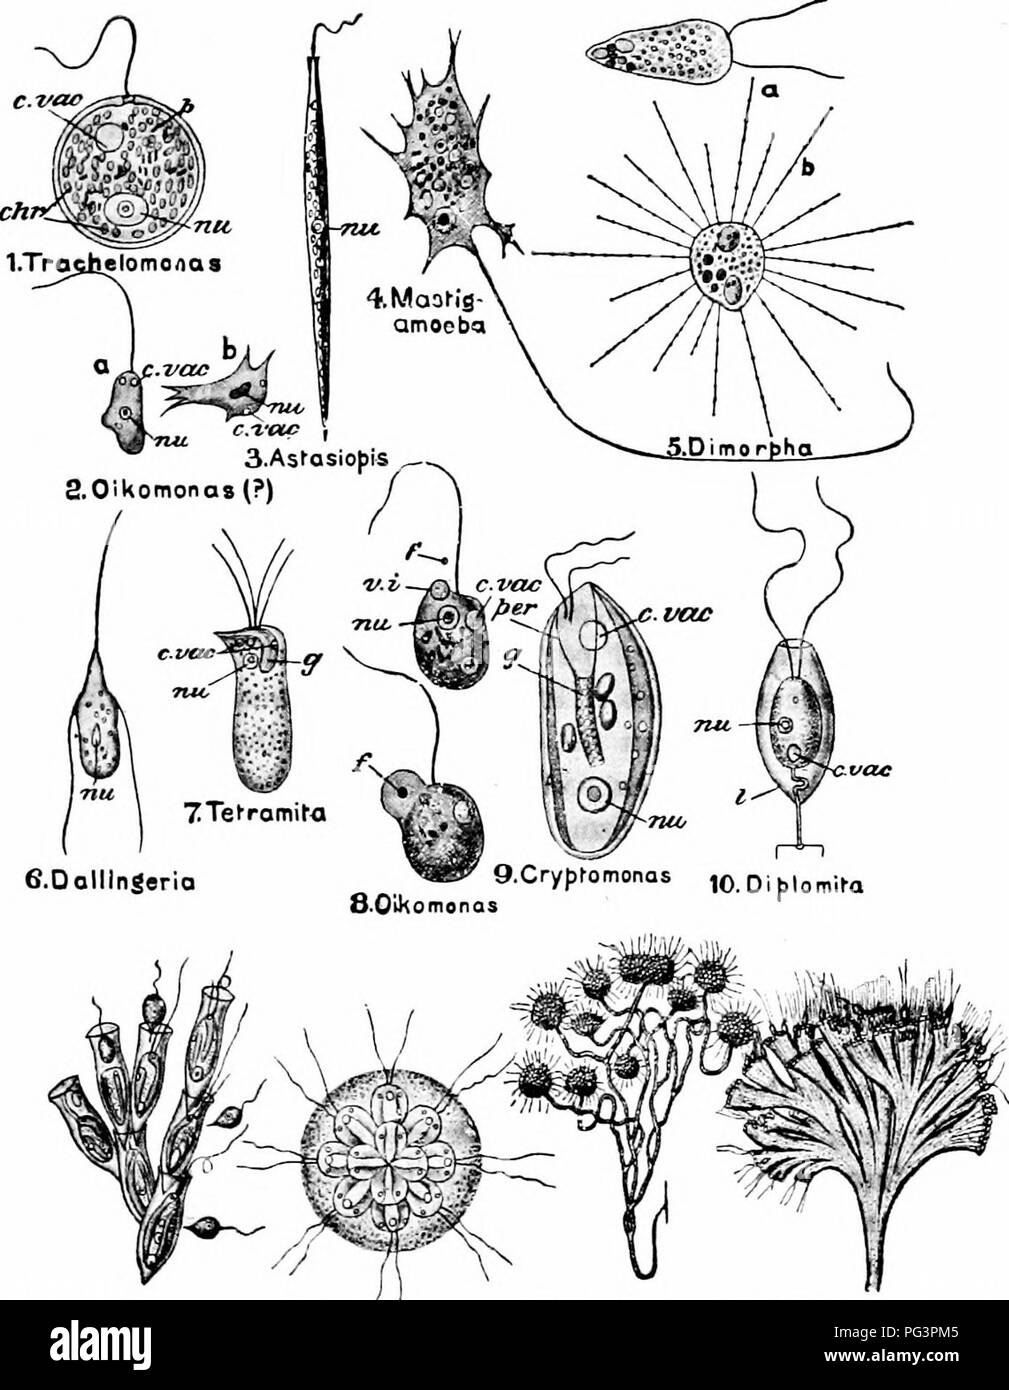 . A manual of zoology. . It.Dinobryon 12.Syncryf&gt;ra 13.Anhho^hysa H.Rhit&gt;idodendron Fig. 13.—Various forms of Mastigophora. In.', flagellate (a) and amoeboid (b) phases are shown; in 5, flagellate (a) and heliozoan (6) phases; in 8 are shown two stages in the ingestion of a food particle {f} chr, chromatophores; c. vac, contractile vacuole; /, food particle ; g, gullet; rut, nucleus; /, lorica; /, protoplasm; per, peristome; 7'. t, vacuole of ingestion. (Mostly from Biit- schli's Protozoa, after various authors.) 37. Please note that these images are extracted from scanned page images t Stock Photo